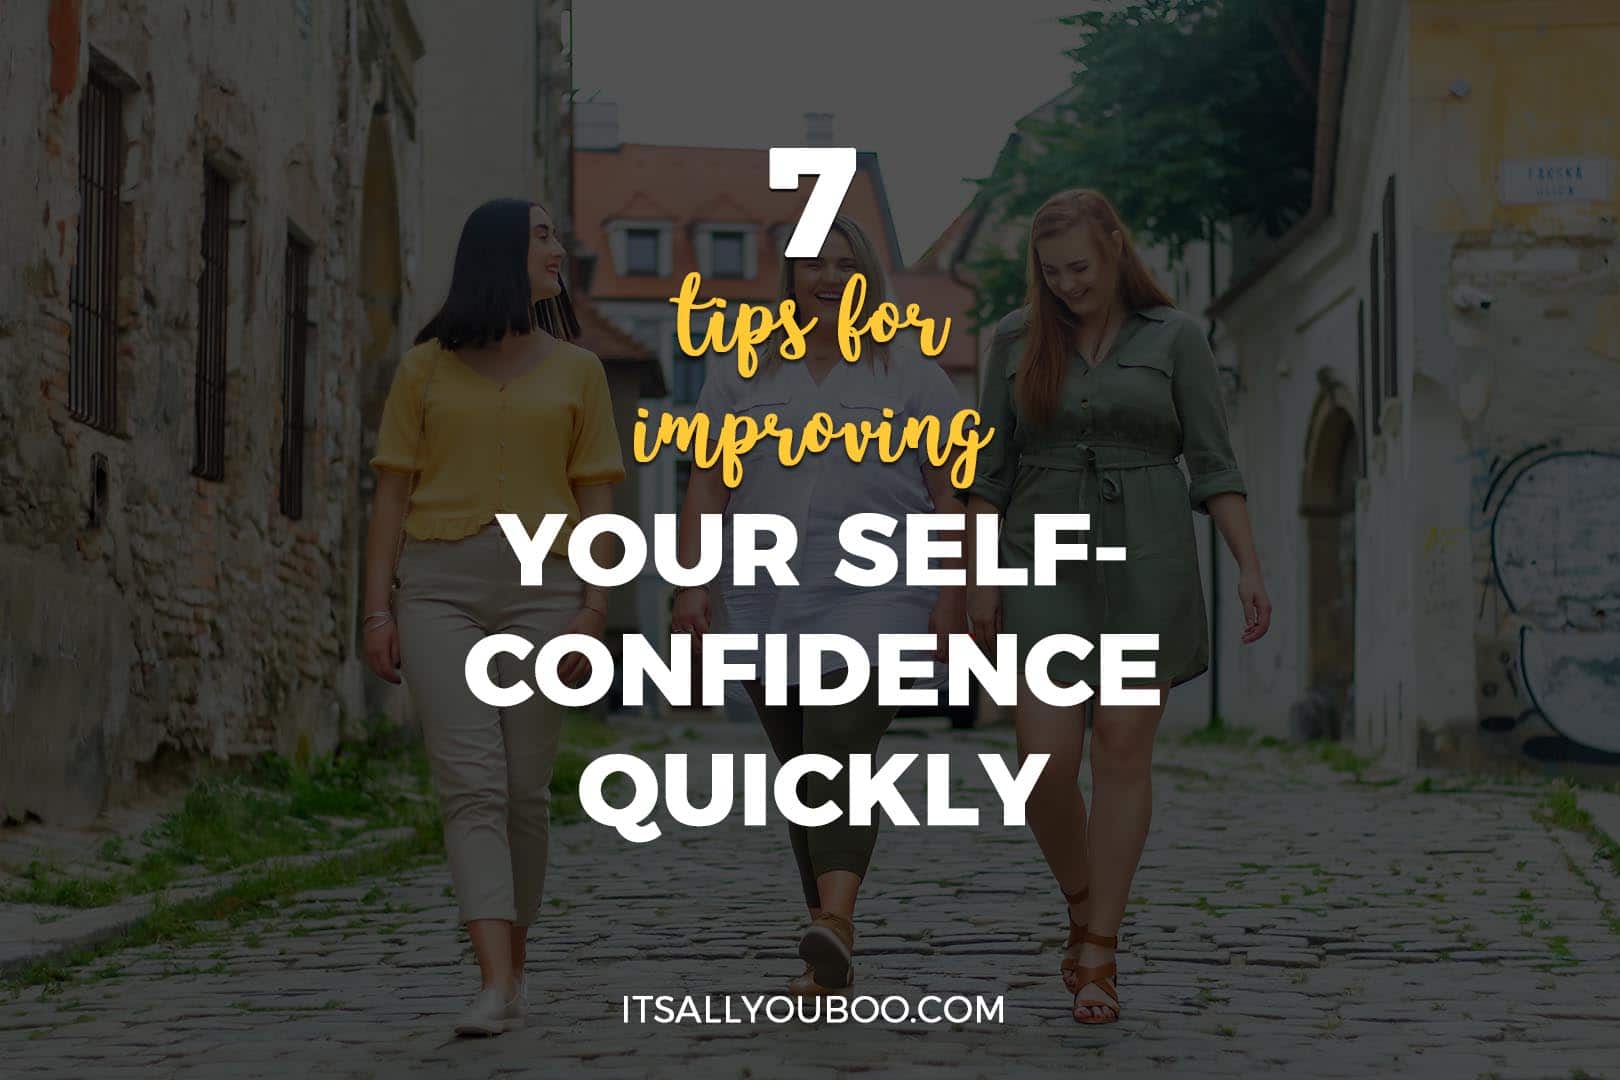 7 Tips for Improving Your Self-Confidence Quickly